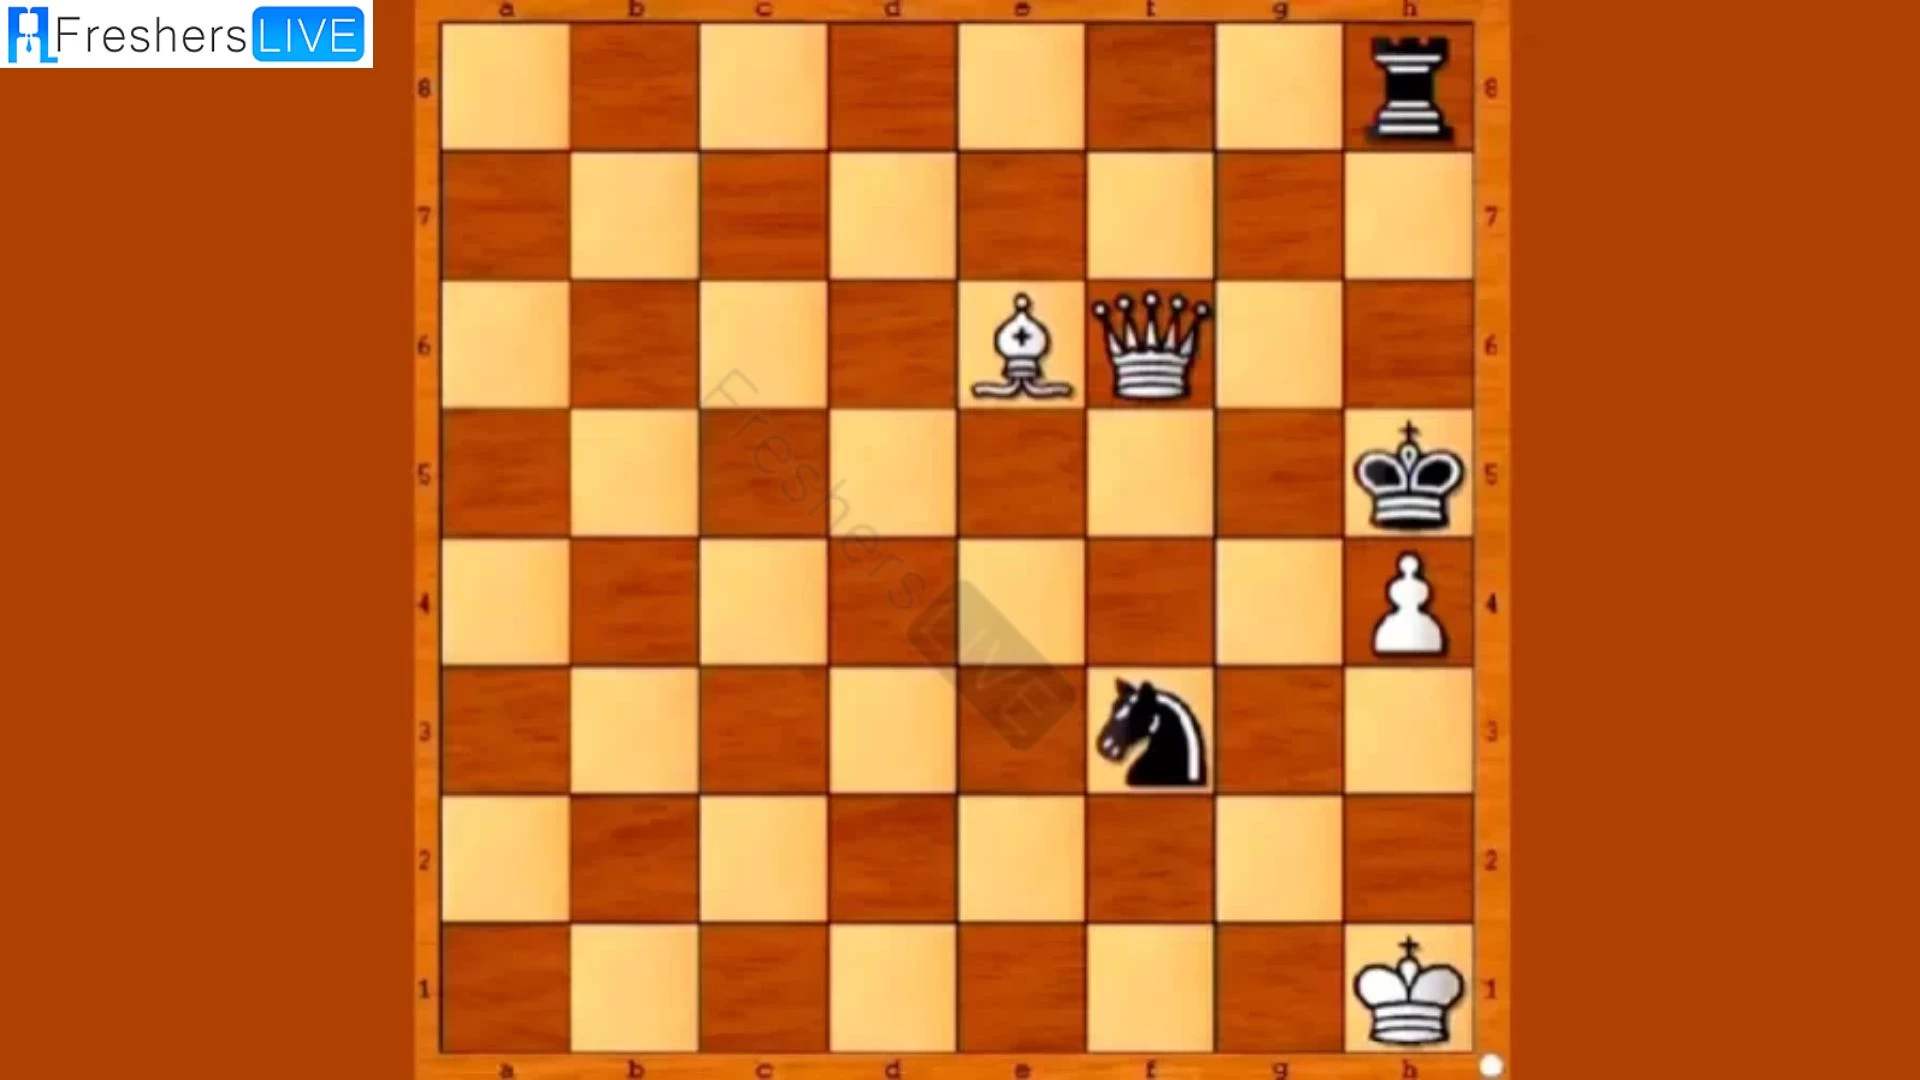 Only Masterminds Can Solve This Chess Puzzle in 2 Moves